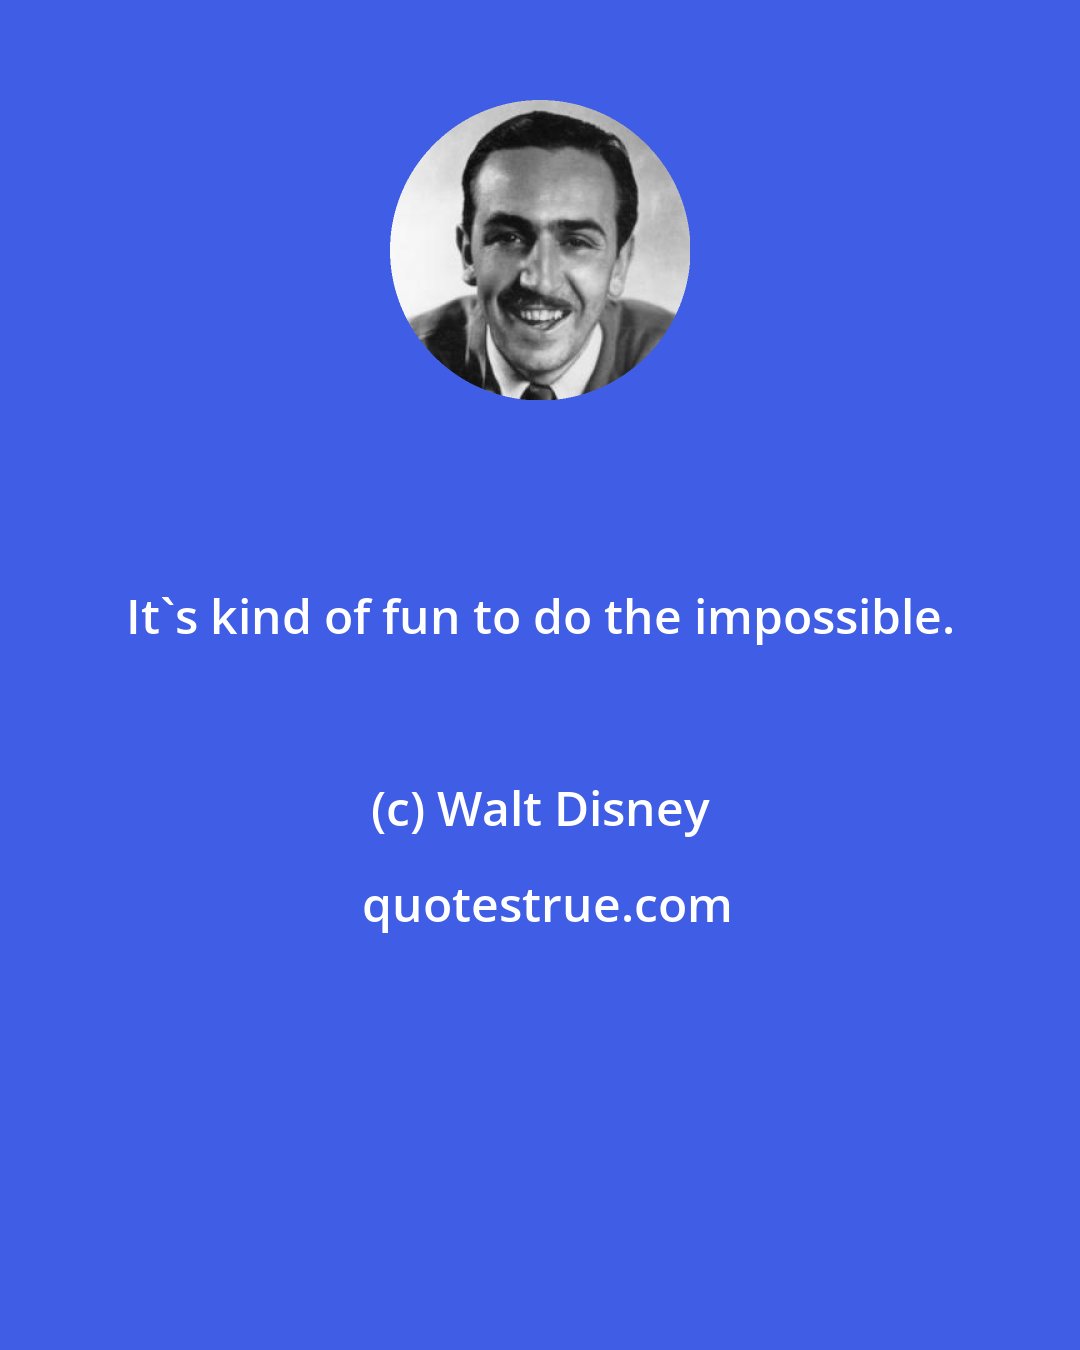 Walt Disney: It's kind of fun to do the impossible.